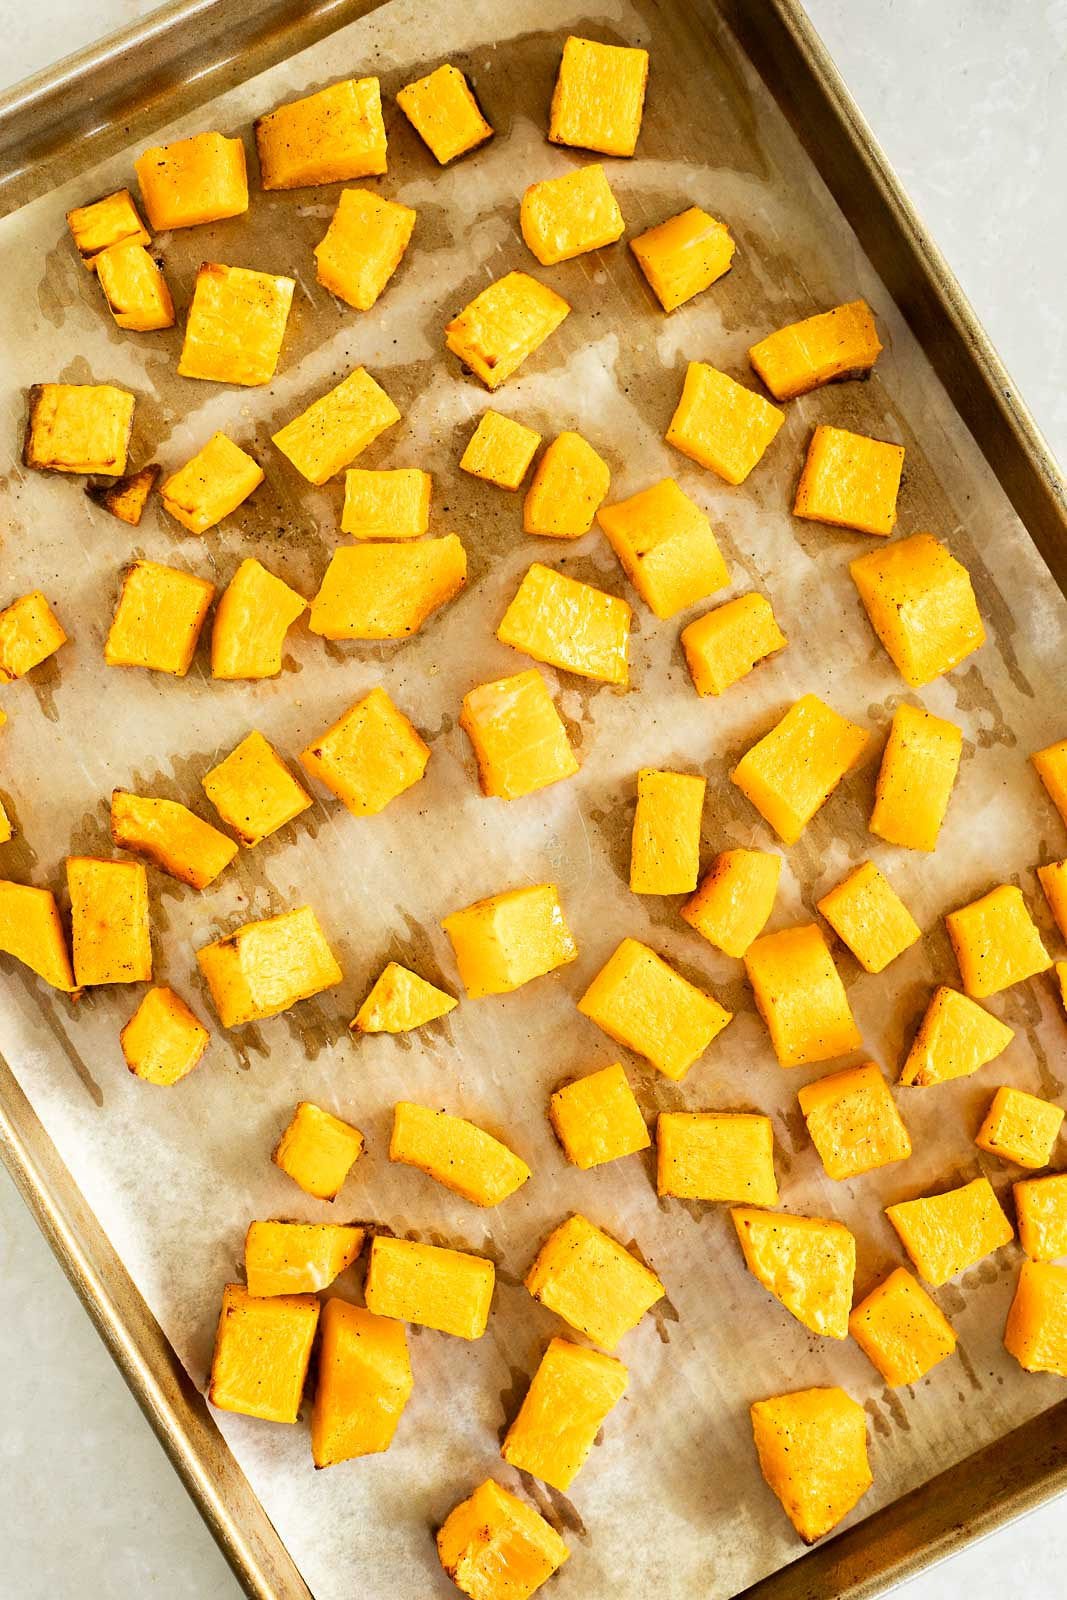 Roasted butternut squash on a parchment lined baking sheet.